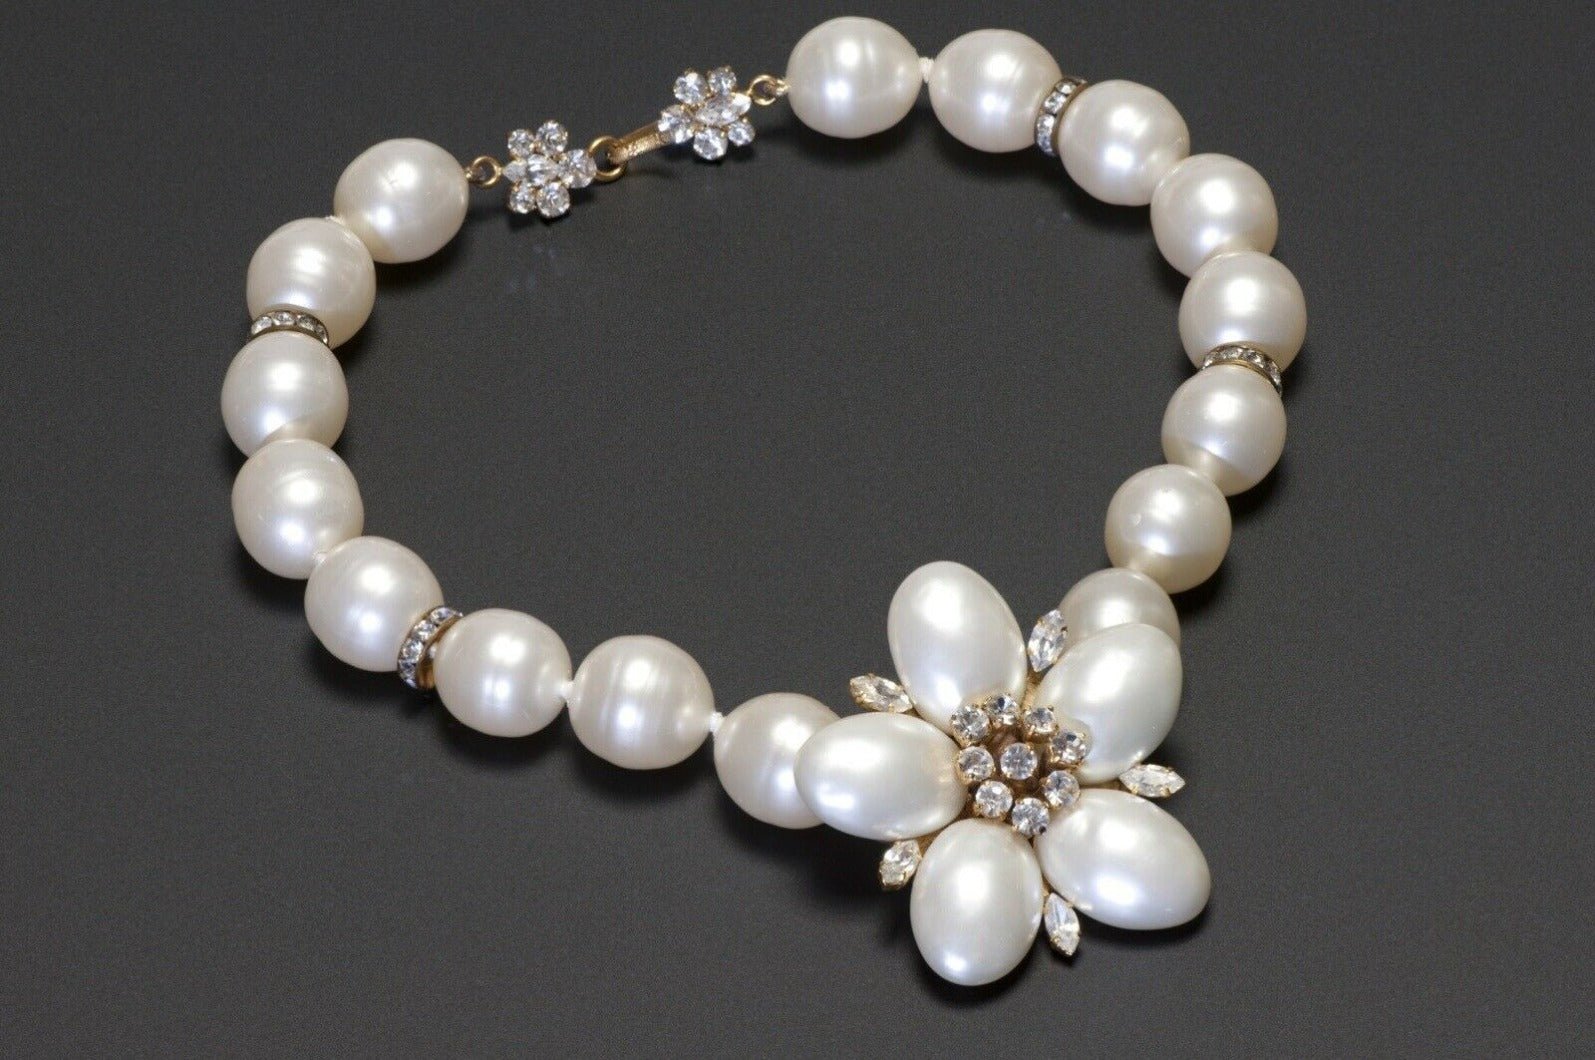 CHANEL Paris 1990’s Faux Pearl Glass Crystal Camellia Necklace - DSF Antique Jewelry